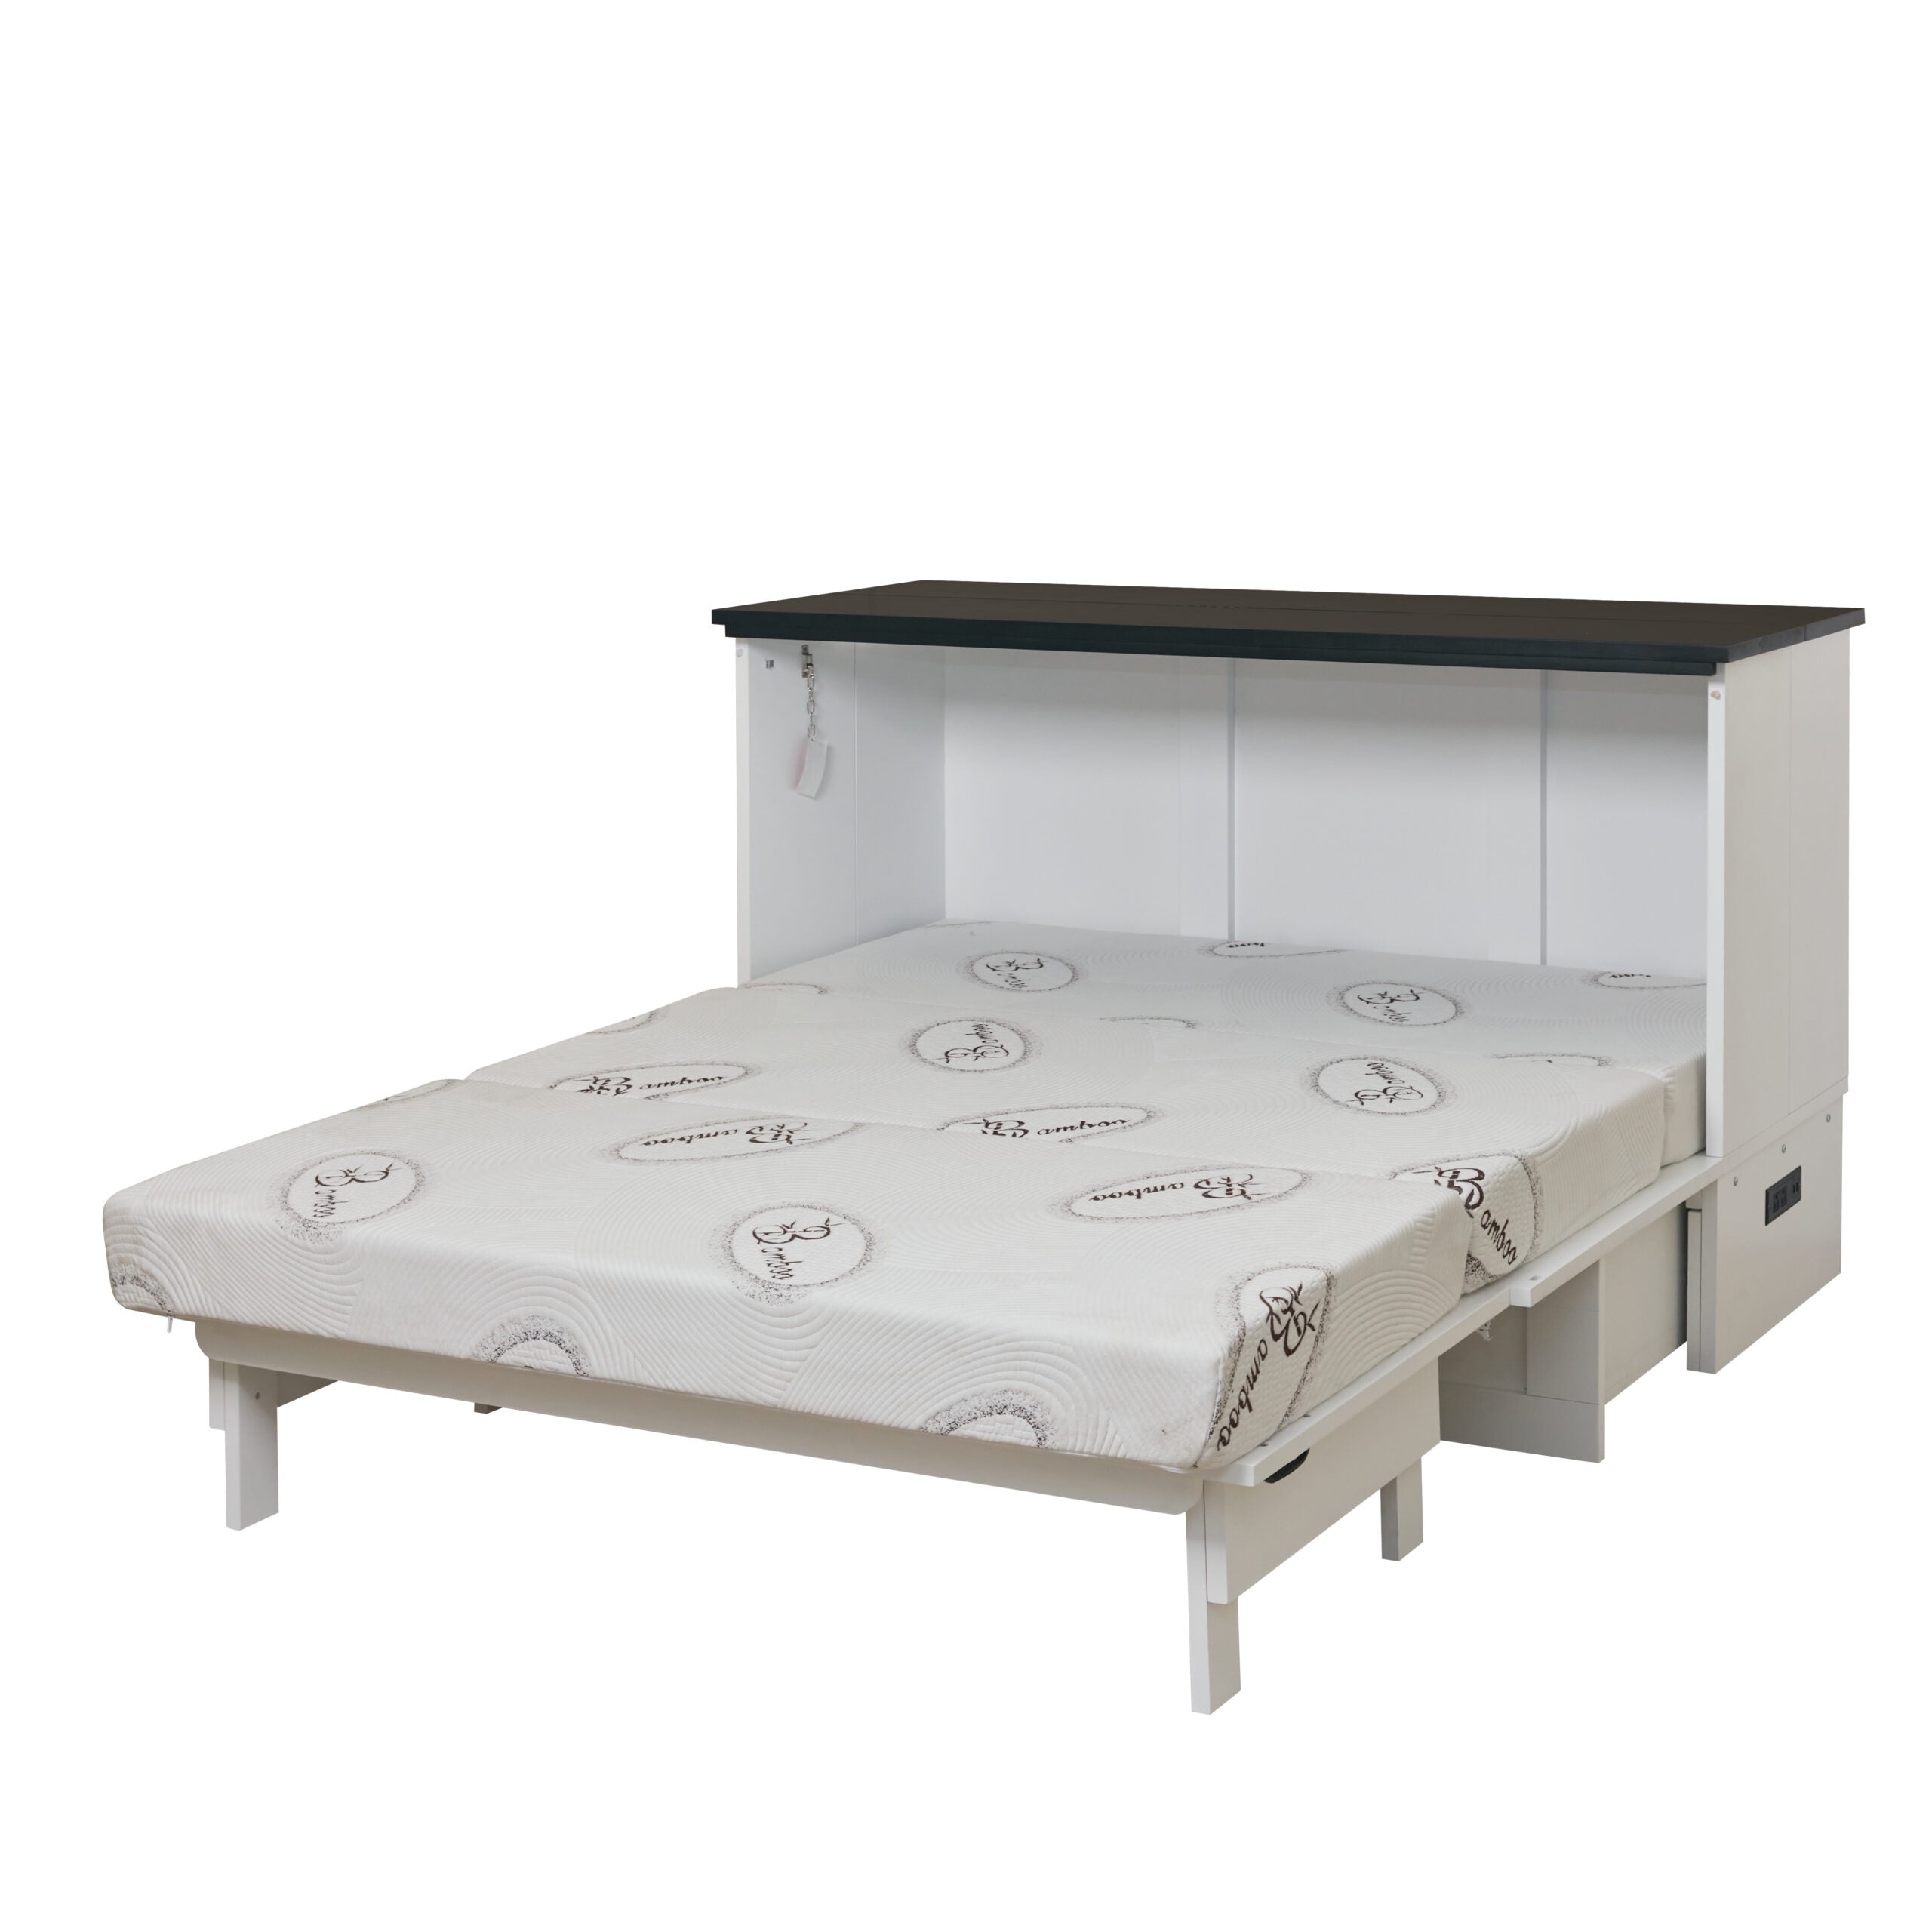 Cootage White Cabinet Bed with Gel Mattress.